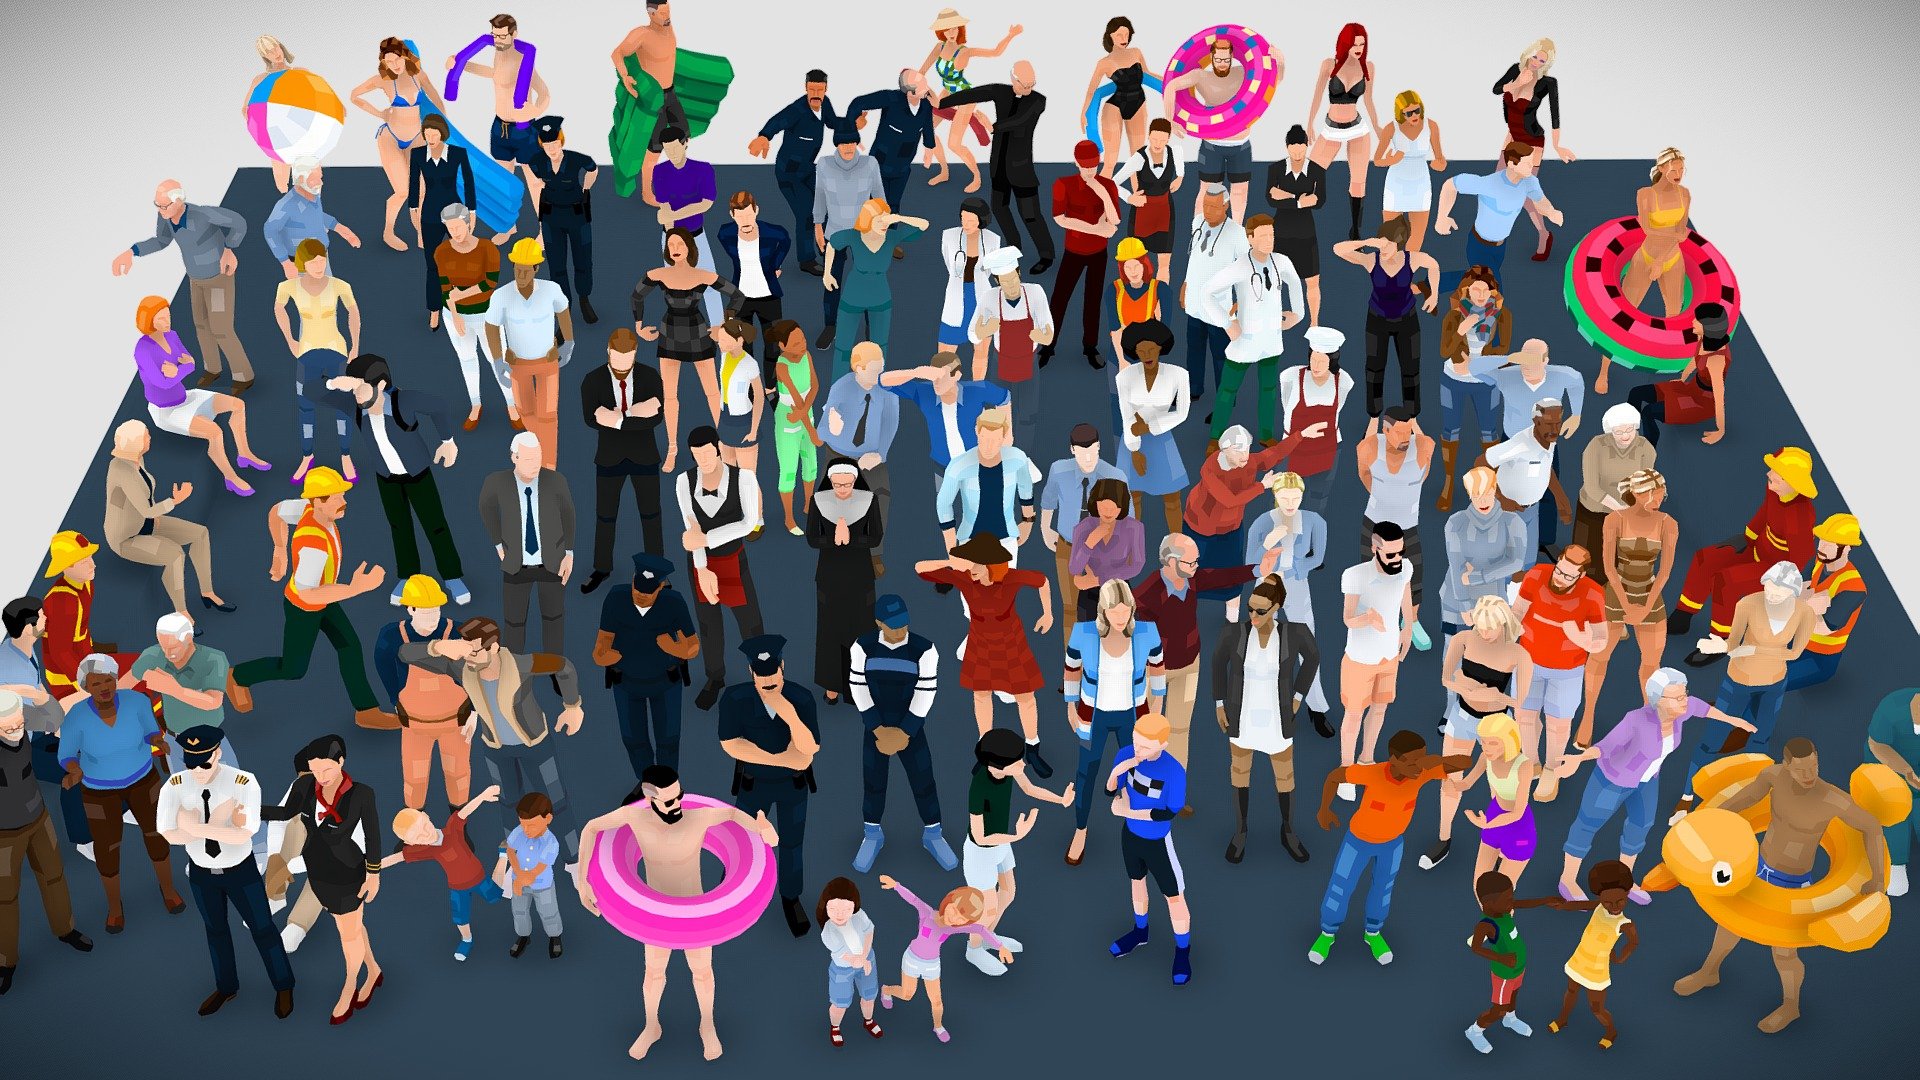 The definitive collection for all your city people needs.

Low Poly Style characters modeled and rigged with 3ds Max Biped+Skin. With exports to .FBX .OBJ and Unity package. The
whole pack uses a single-color palette texture. The UV mapping can be easily modified using my own 3ds Max script: pX Poly Paint .

All individuals are manually crafted to achieve a unique appearance in terms of face, body shape and skin color. With four major age groups: Kids, teens, adults, and elders. This collection is tested and proven to be suitable for illustration and explainer videos, architecture visualizations and WebGL/Mobile/AR/VR applications and games. Free samples available!.




Enjoy! - 100-Mega-Pack LowPoly Rigged People Characters - Buy Royalty Free 3D model by Denys Almaral (@denysalmaral) 3d model